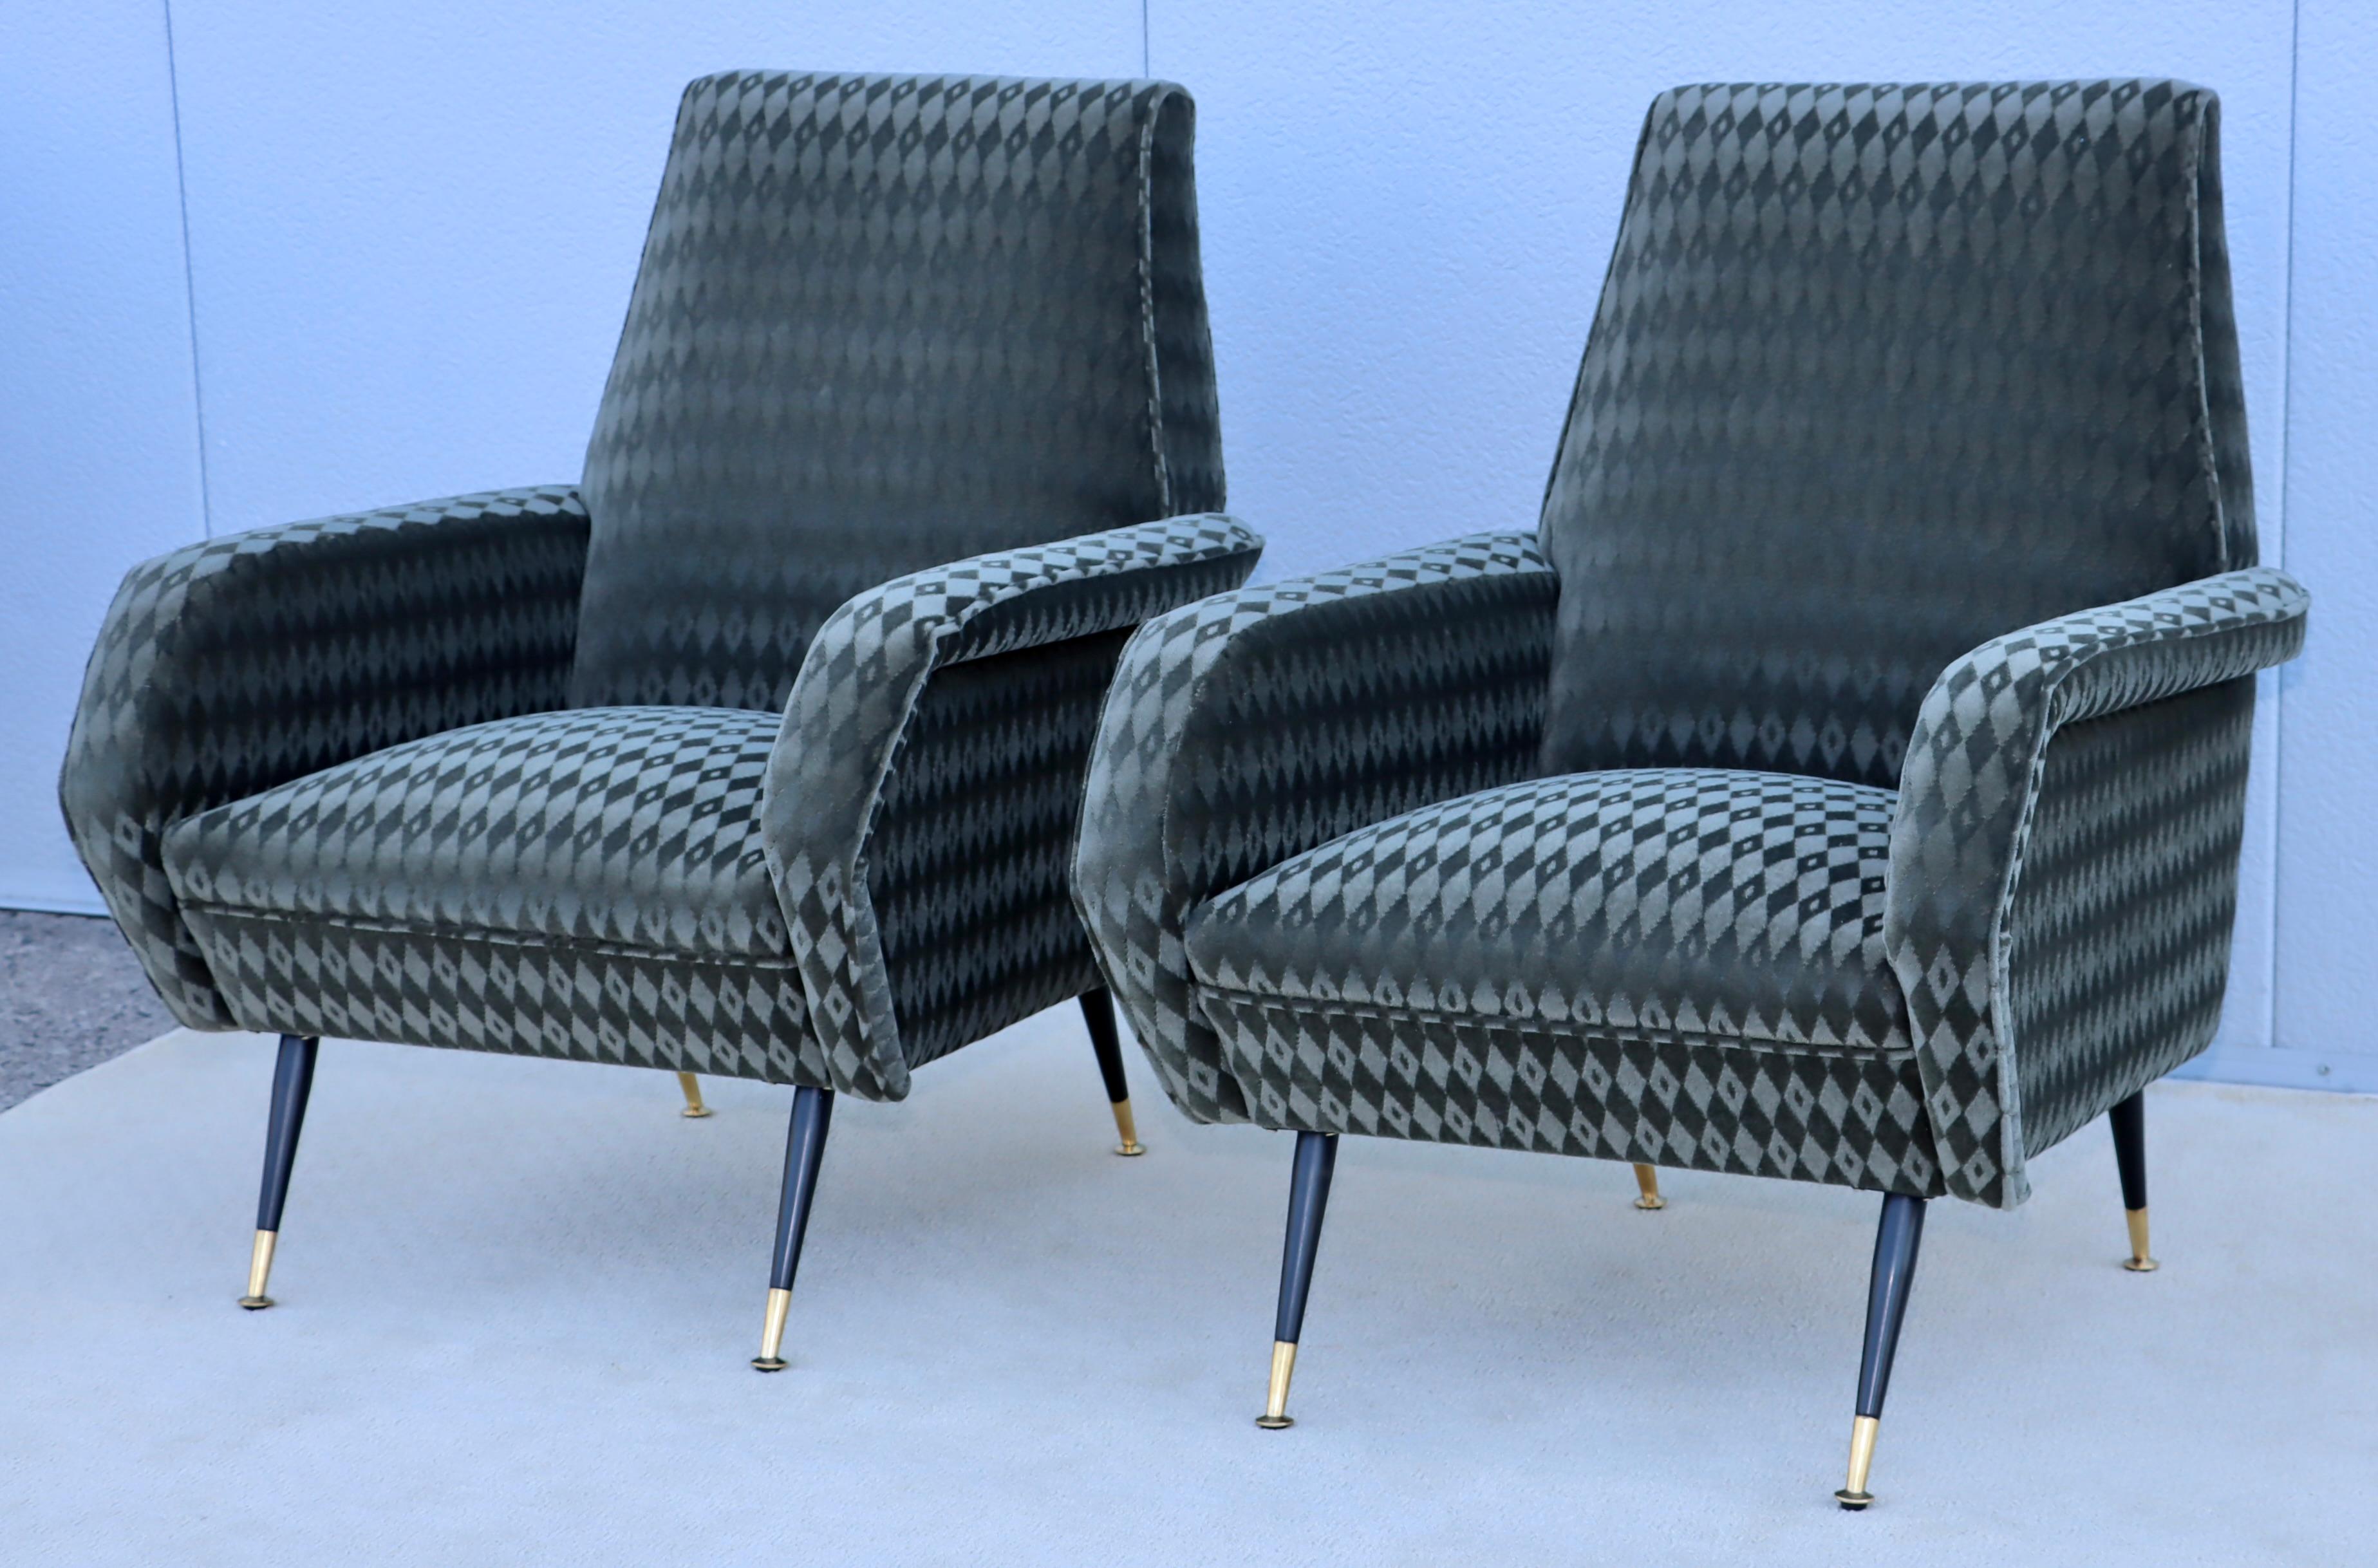 1950's Mid-Century Modern Italian Lounge Chairs With Donghia Mohair Upholstery For Sale 2